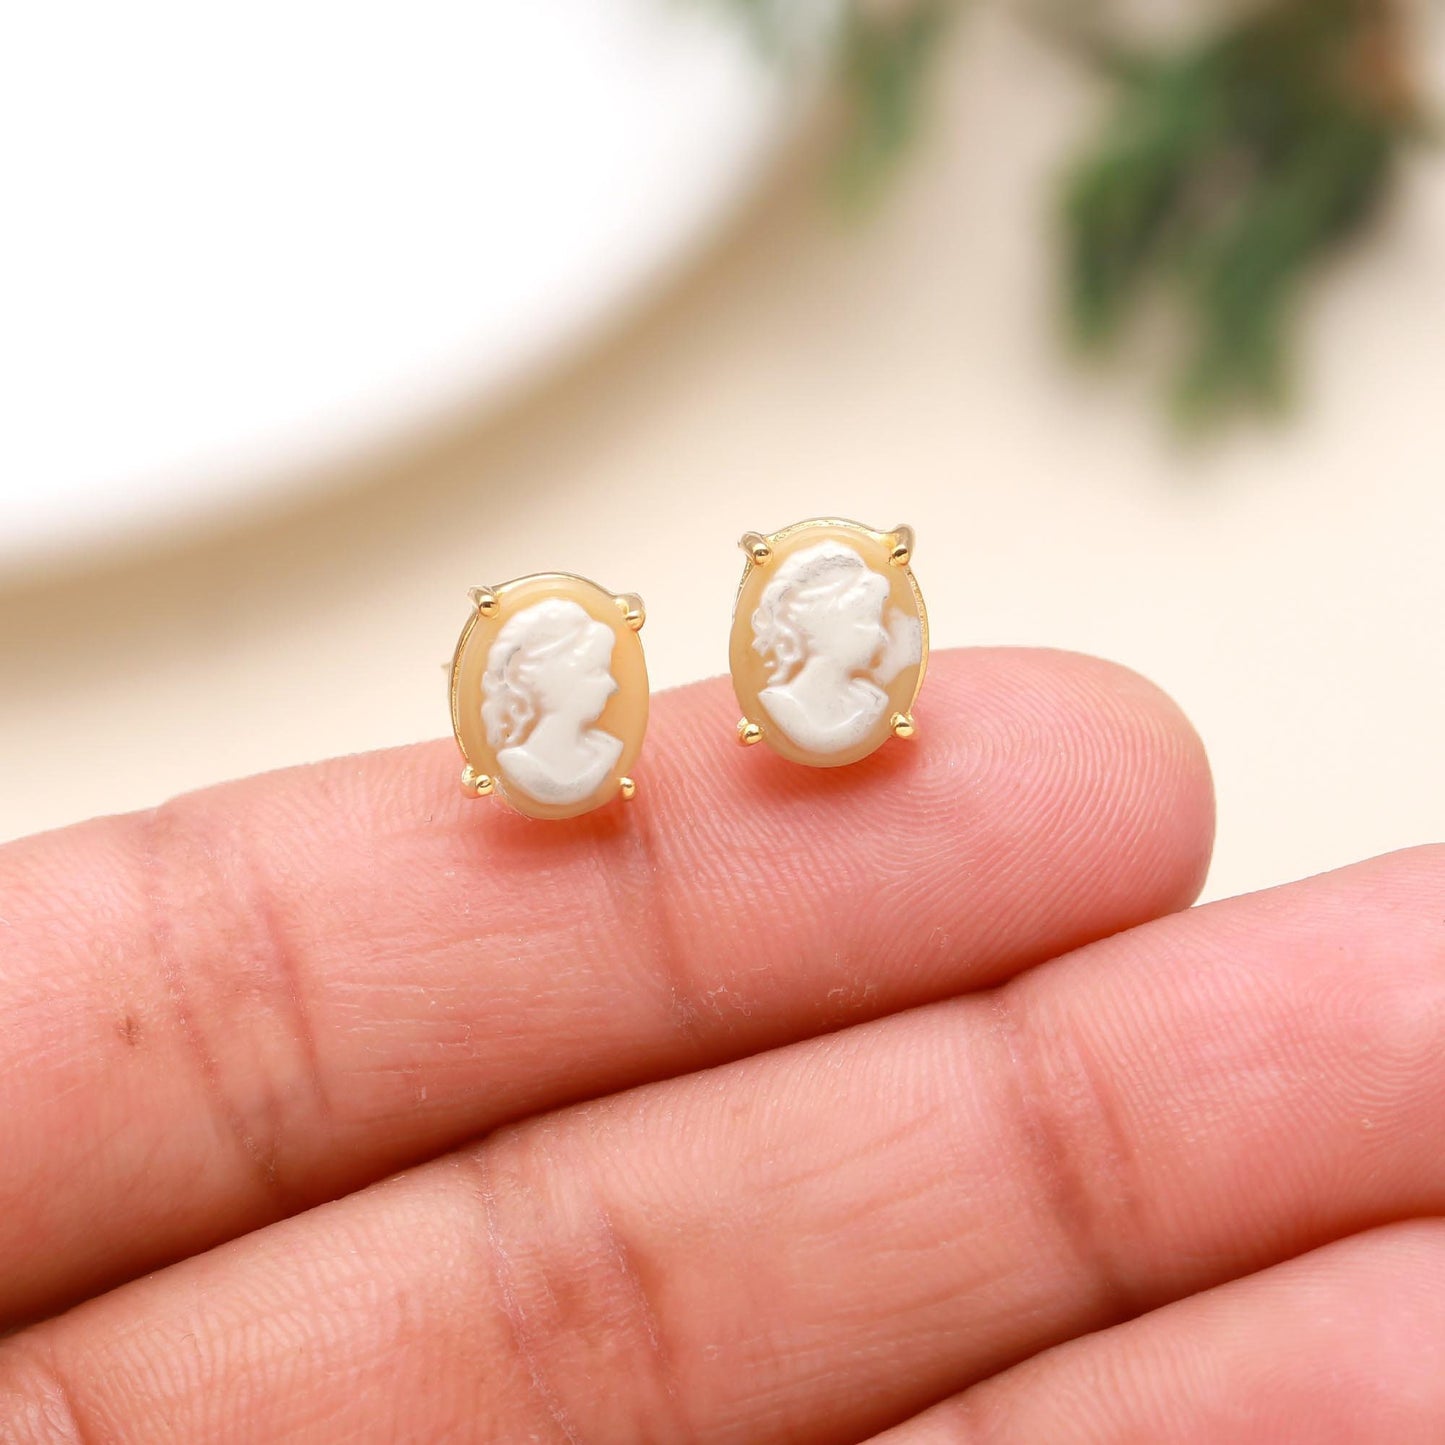 Solid 925 Sterling Silver Cameo Stud Earring with Pushback Gold Plating, Gift Birthday, Anniversary, Mothers Day, Christmas, Women, Girl